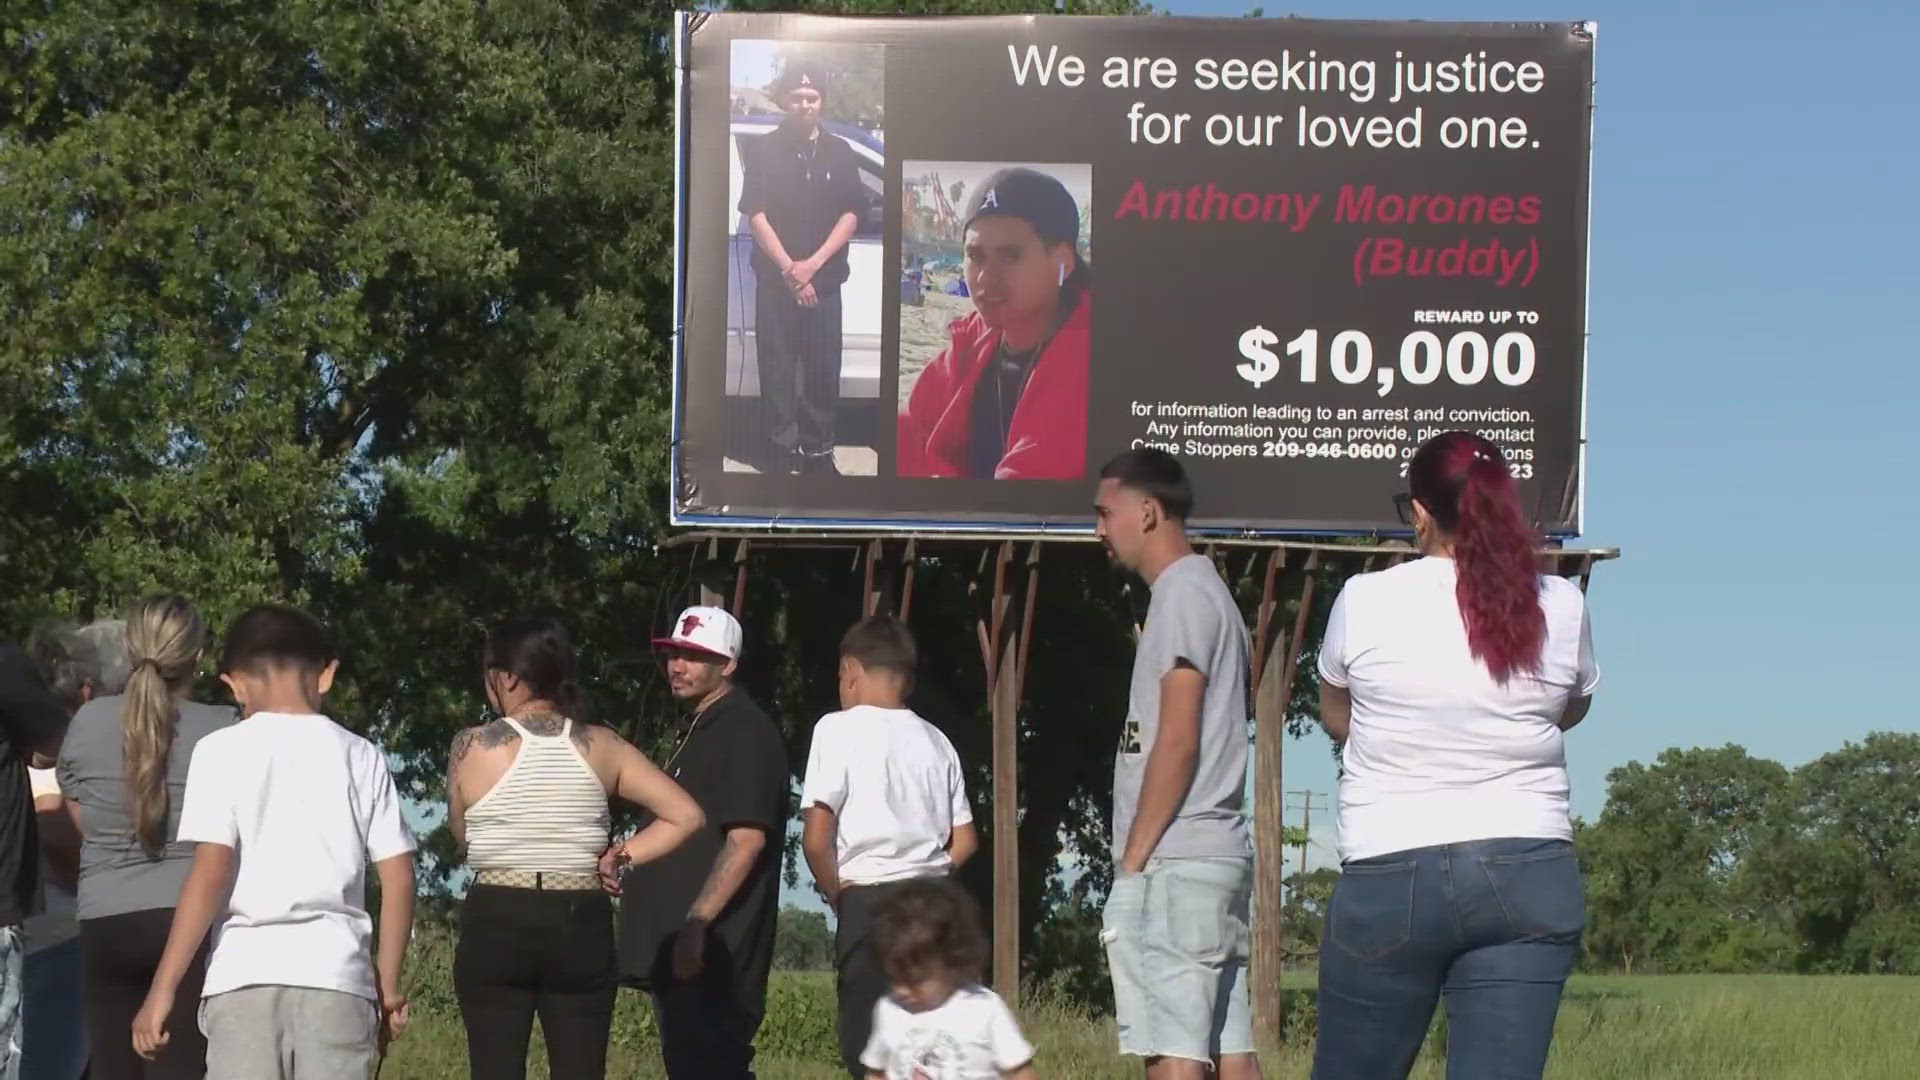 After years of questions regarding what happened to 17-year-old Anthony Morones, one Stockton family is hoping their latest effort could bring answers.